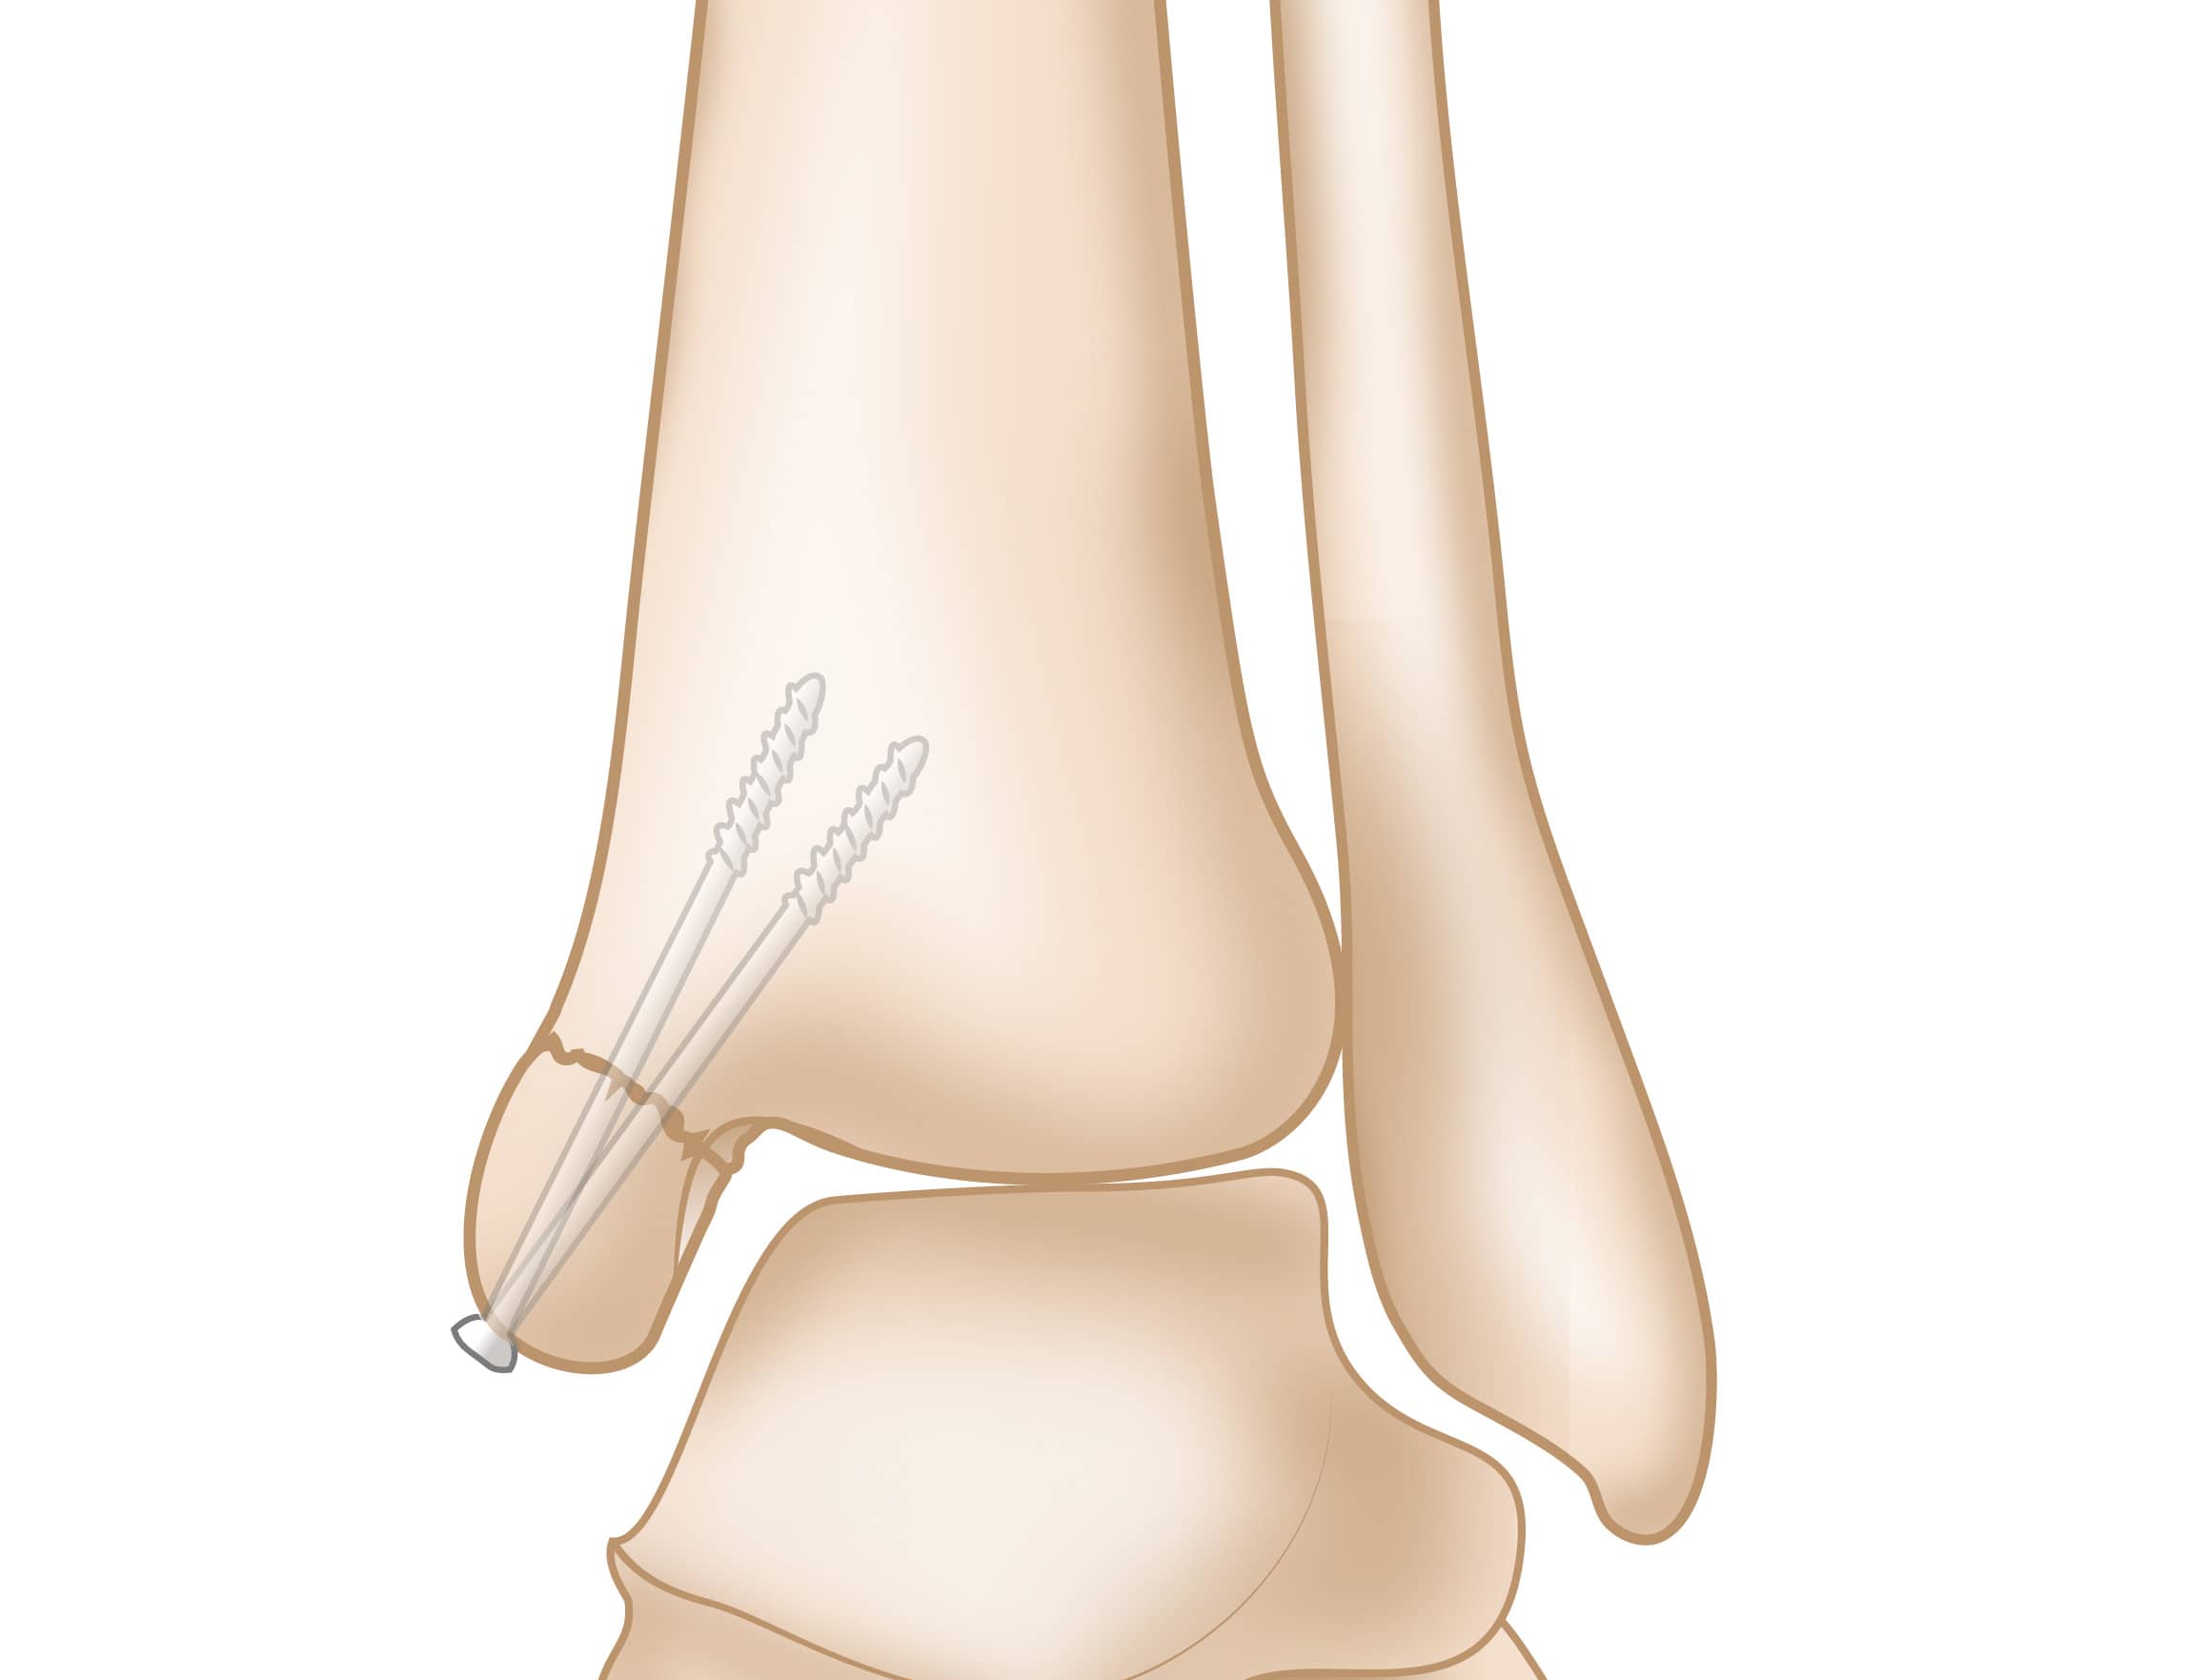 Repaired Medial Malleolus Fracture